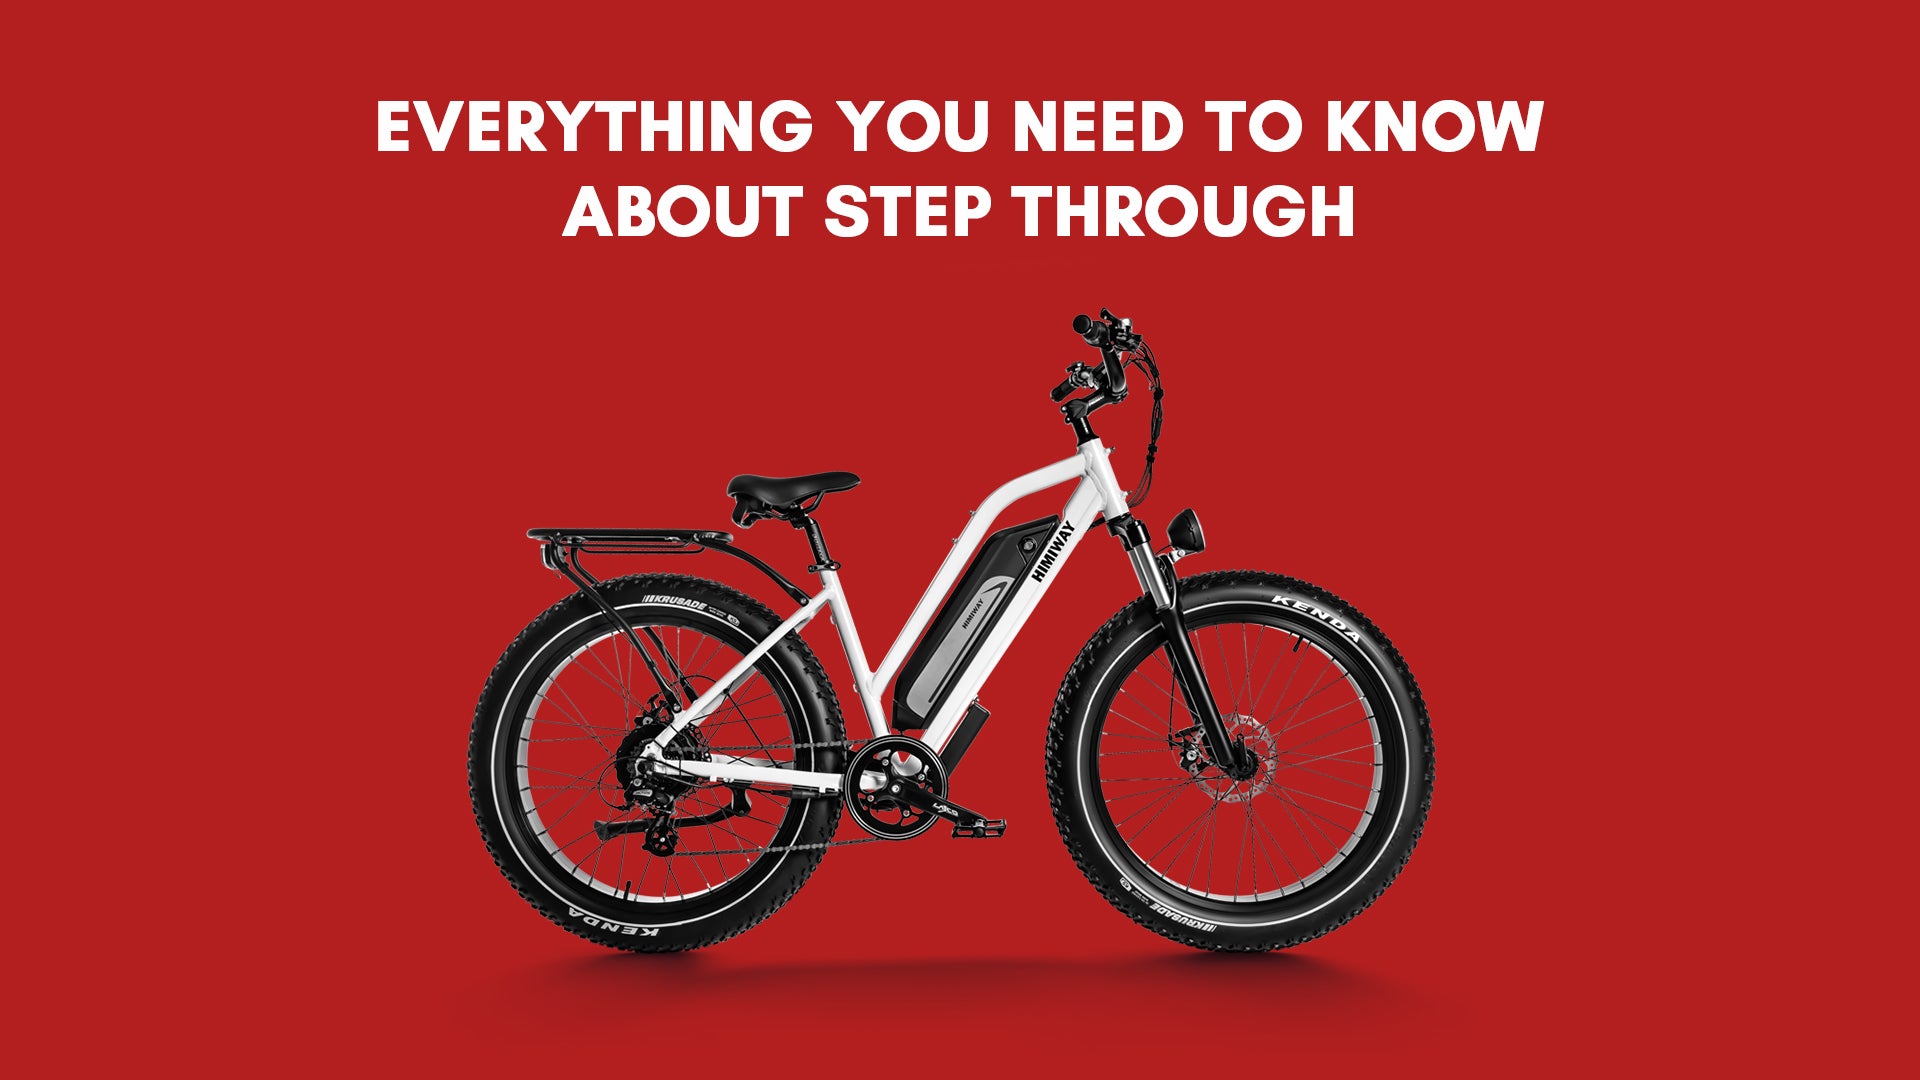 The knowledge about step through bikes and step over bikes